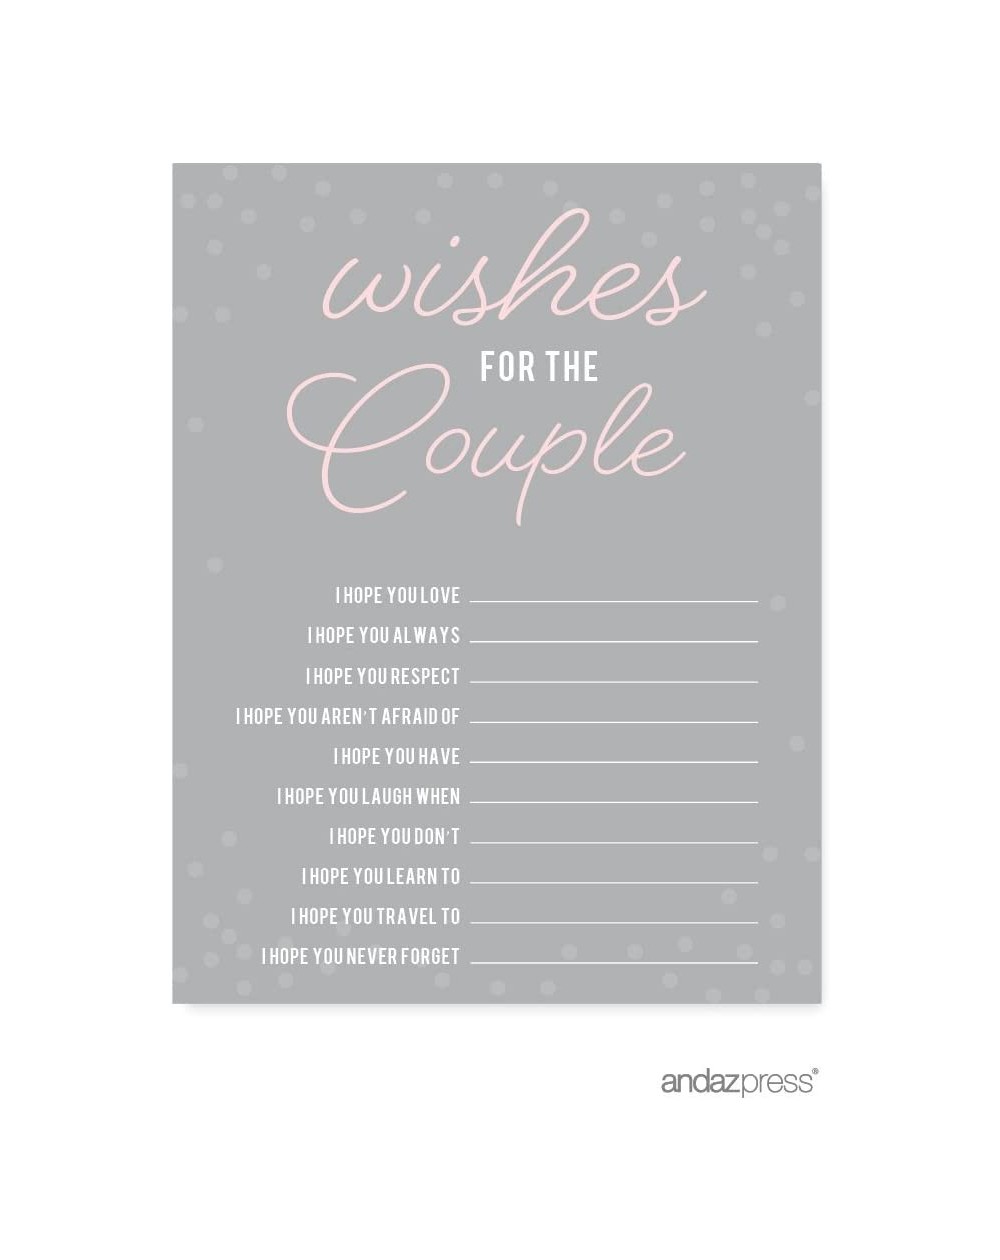 Favors Pink Blush and Gray Pop Fizz Clink Wedding Collection- Wishes for The Newlyweds Advice Cards- 20-Pack - Cards Wishes f...